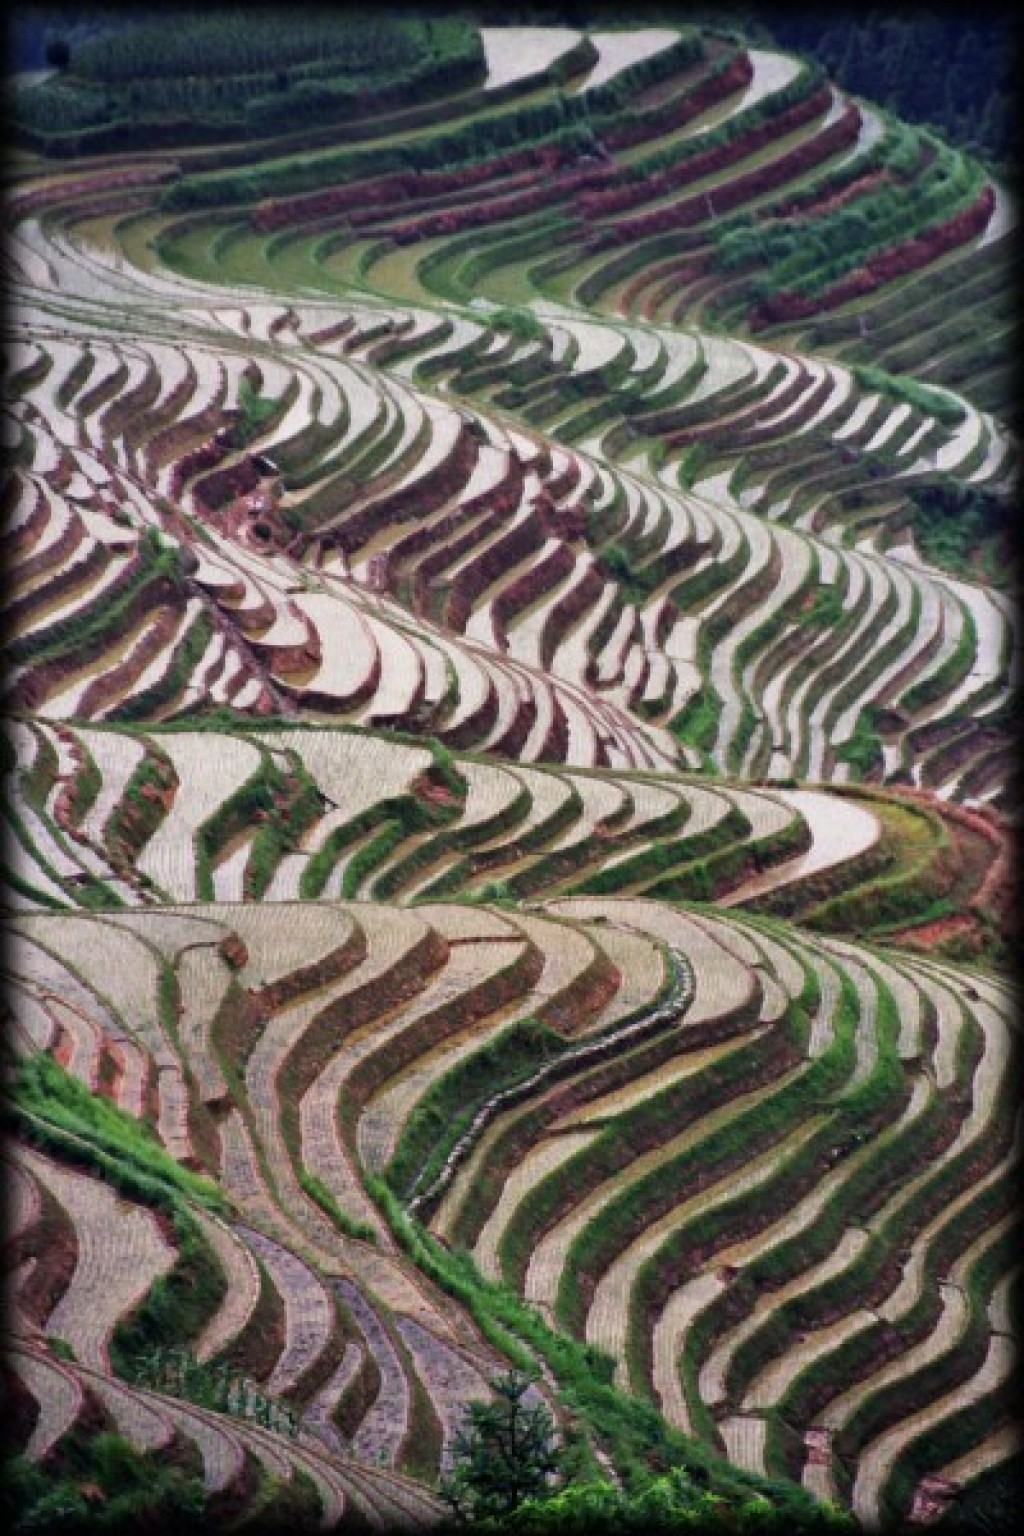 Longshen, or Dragon's Spine Terraces, is known for terraced rice paddies that stretch as far as the eye can see.  It was a highlight of our visit to China. 